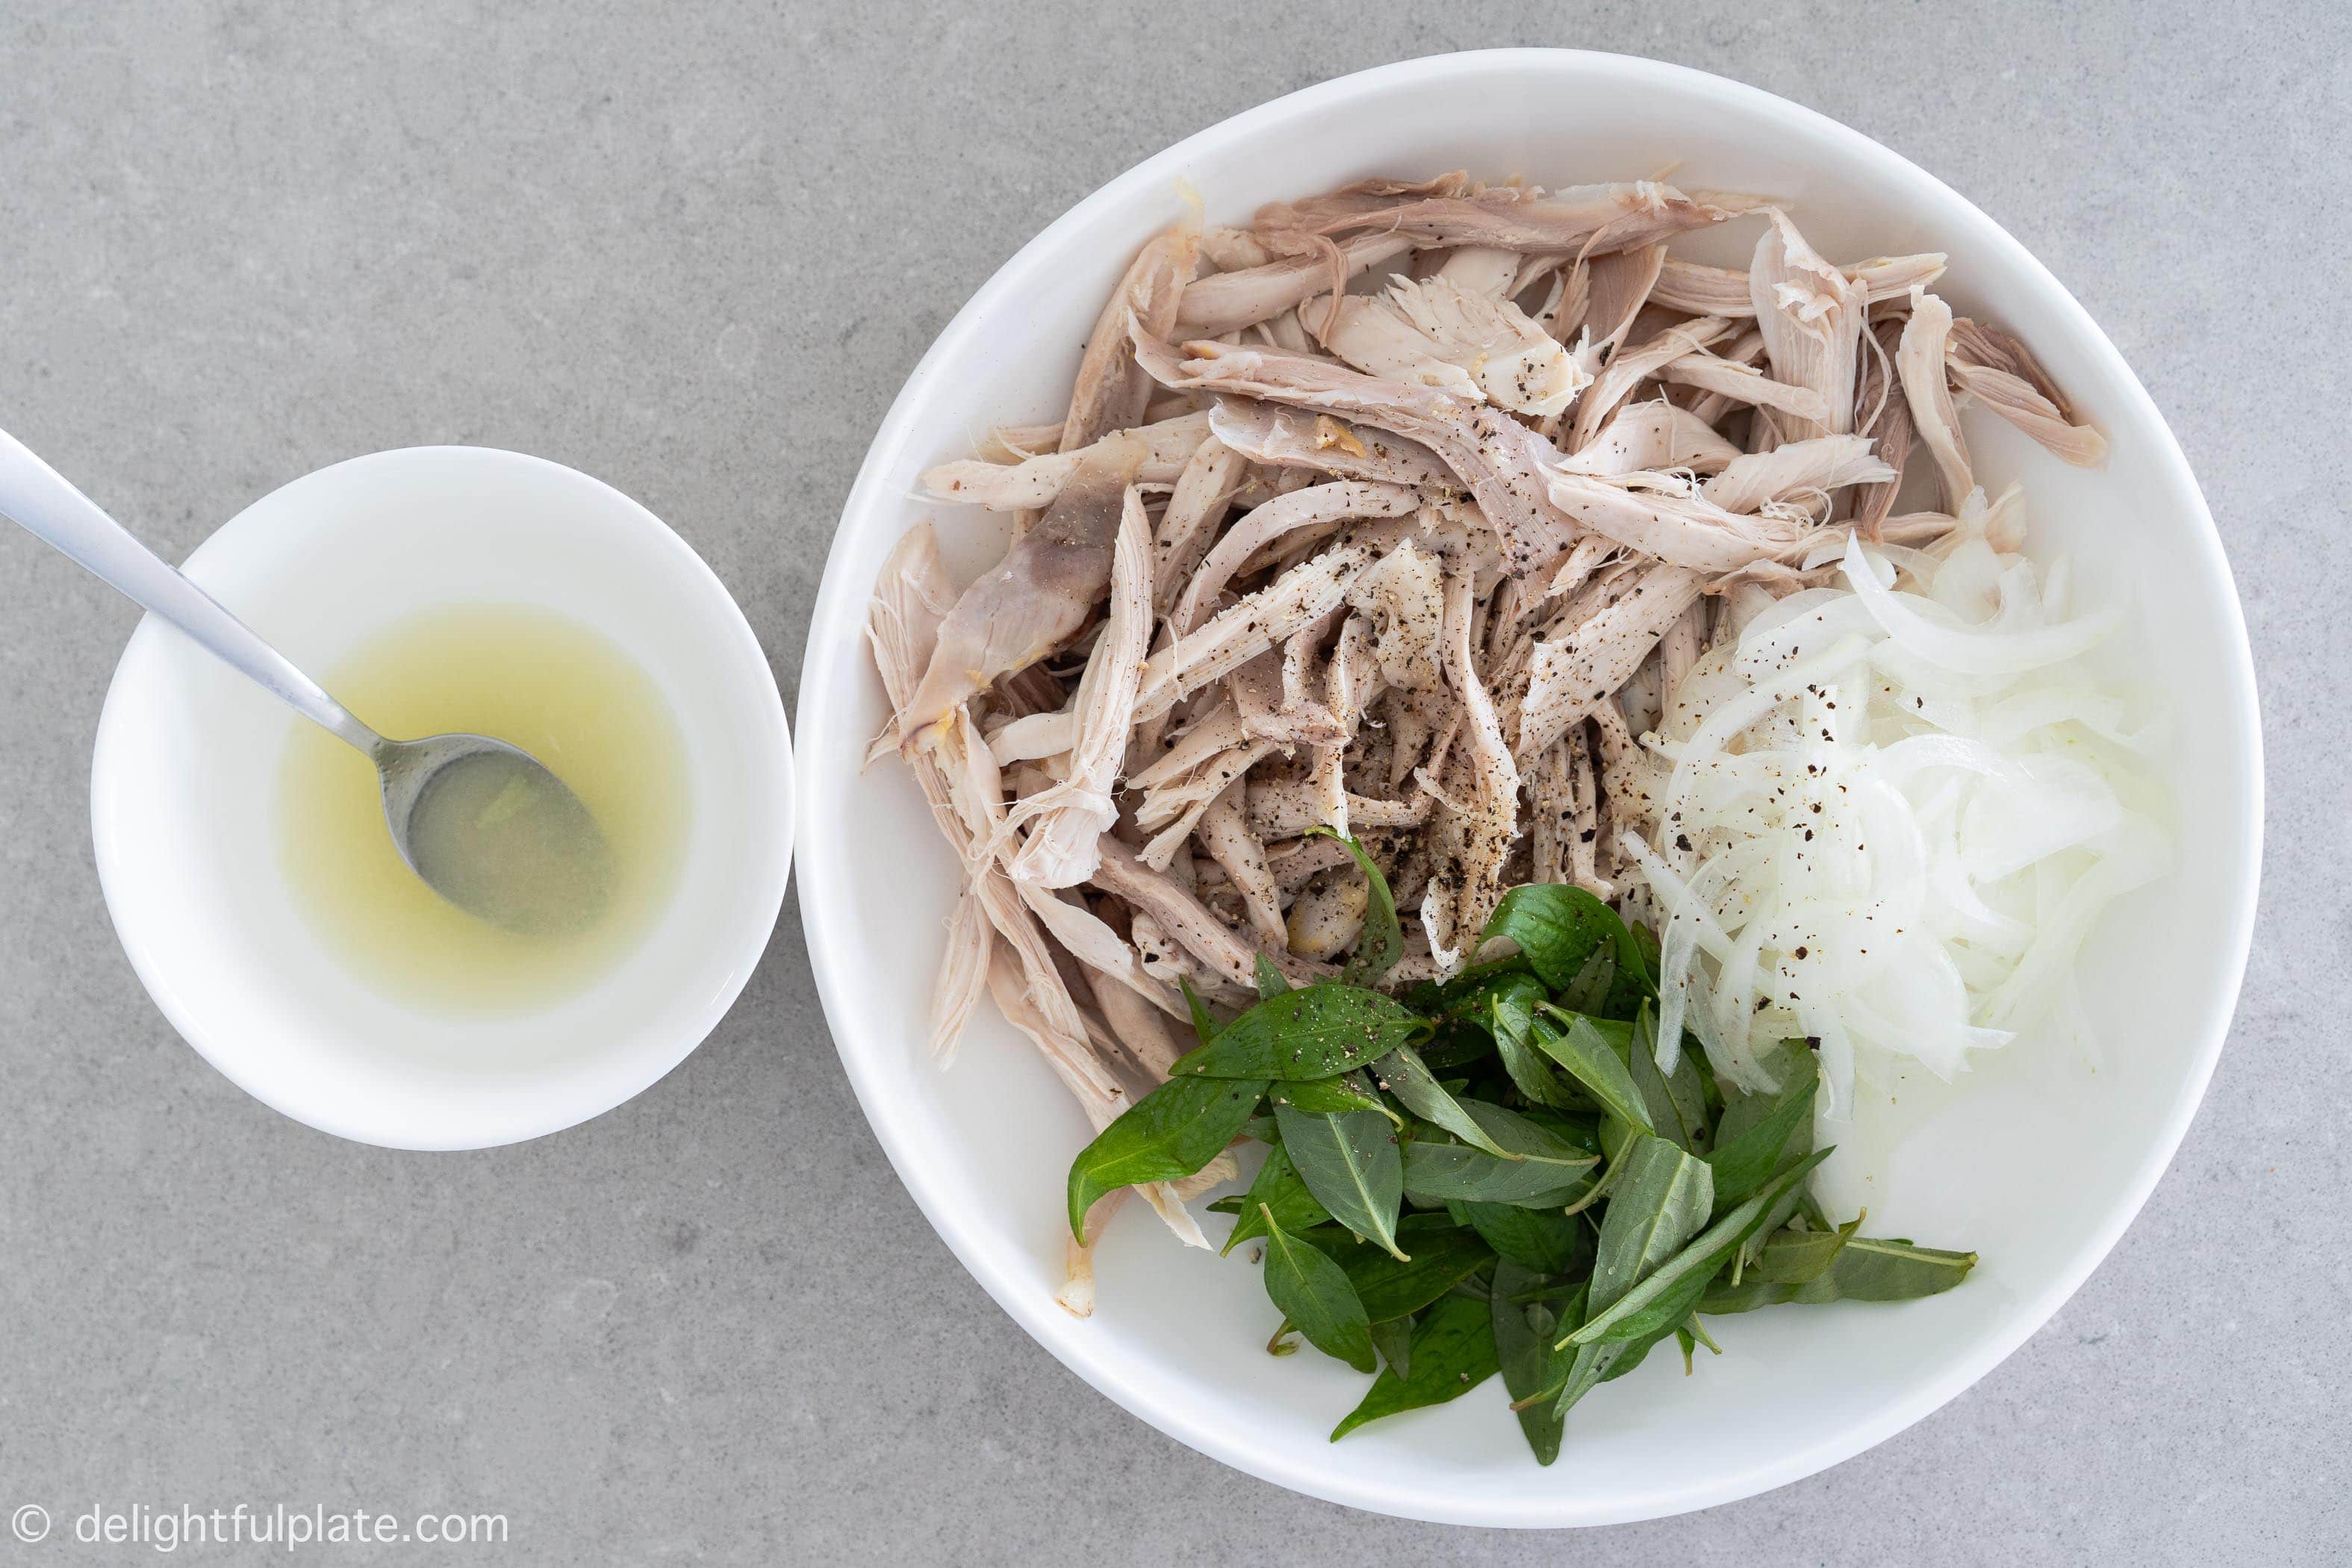 a plate with shredded chicken, onion and Vietnamese coriander